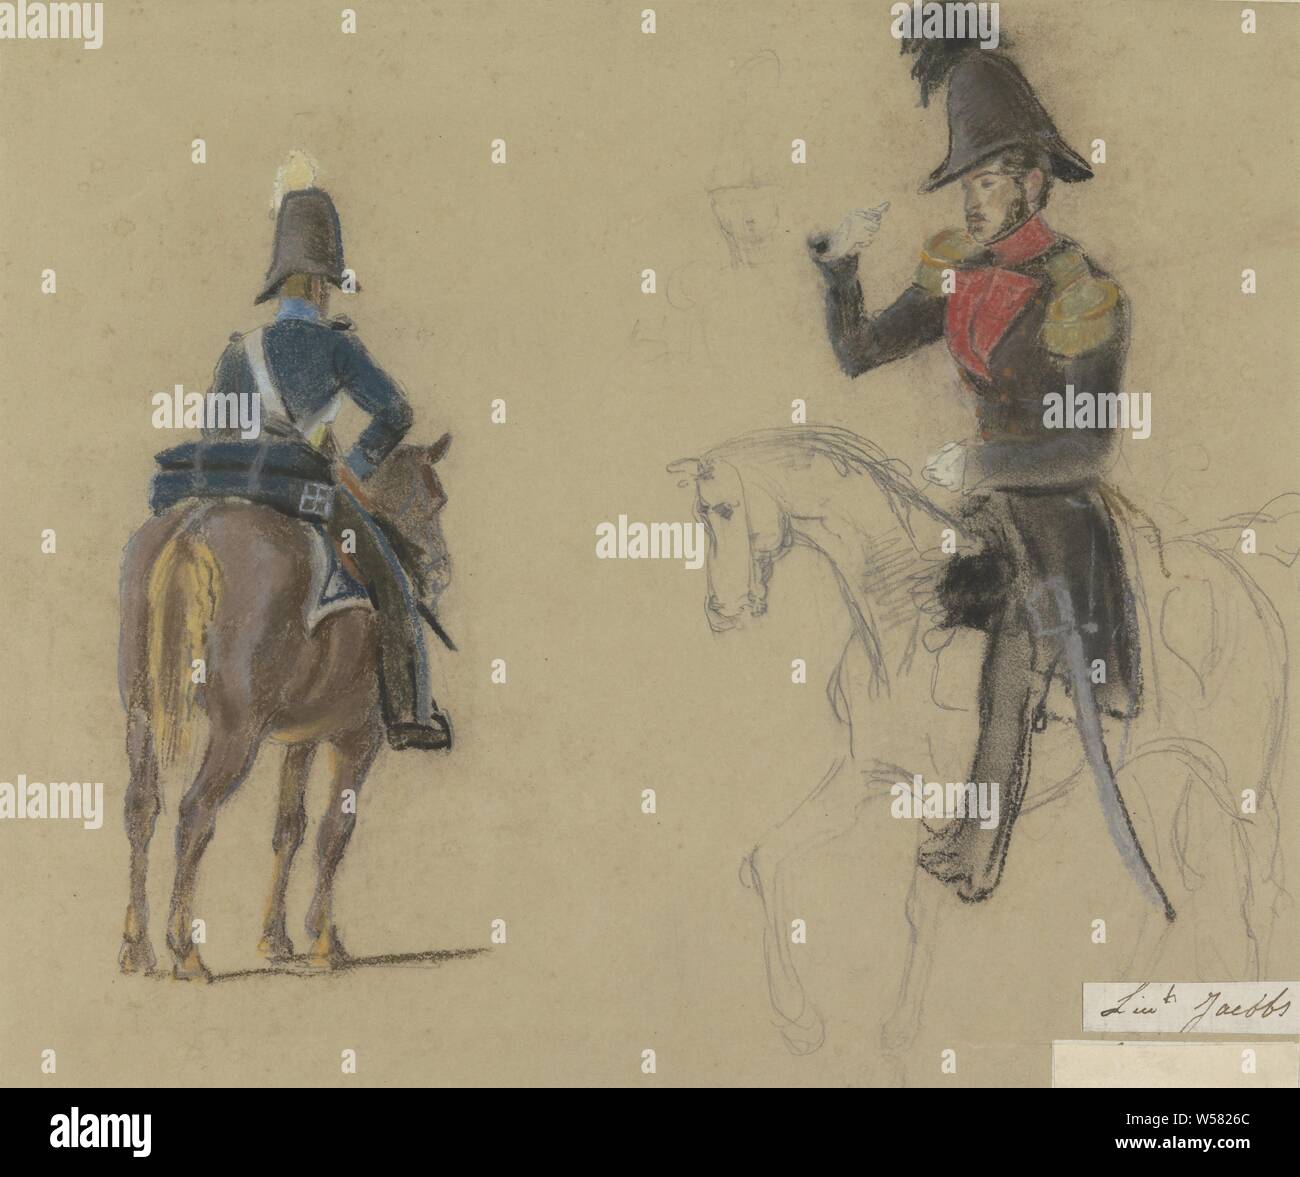 Portrait of Lieutenant Jacobs, on horseback, officer (with NAME of rank), historical person (LUITENANT JACOBS) - historical person (LUITENANT JACOBS) portrayed, lieutenant Jacobs, Jacob Joseph Eeckhout, 1803 - 1861, paper, pencil, h 270 mm × w 325 mm Stock Photo